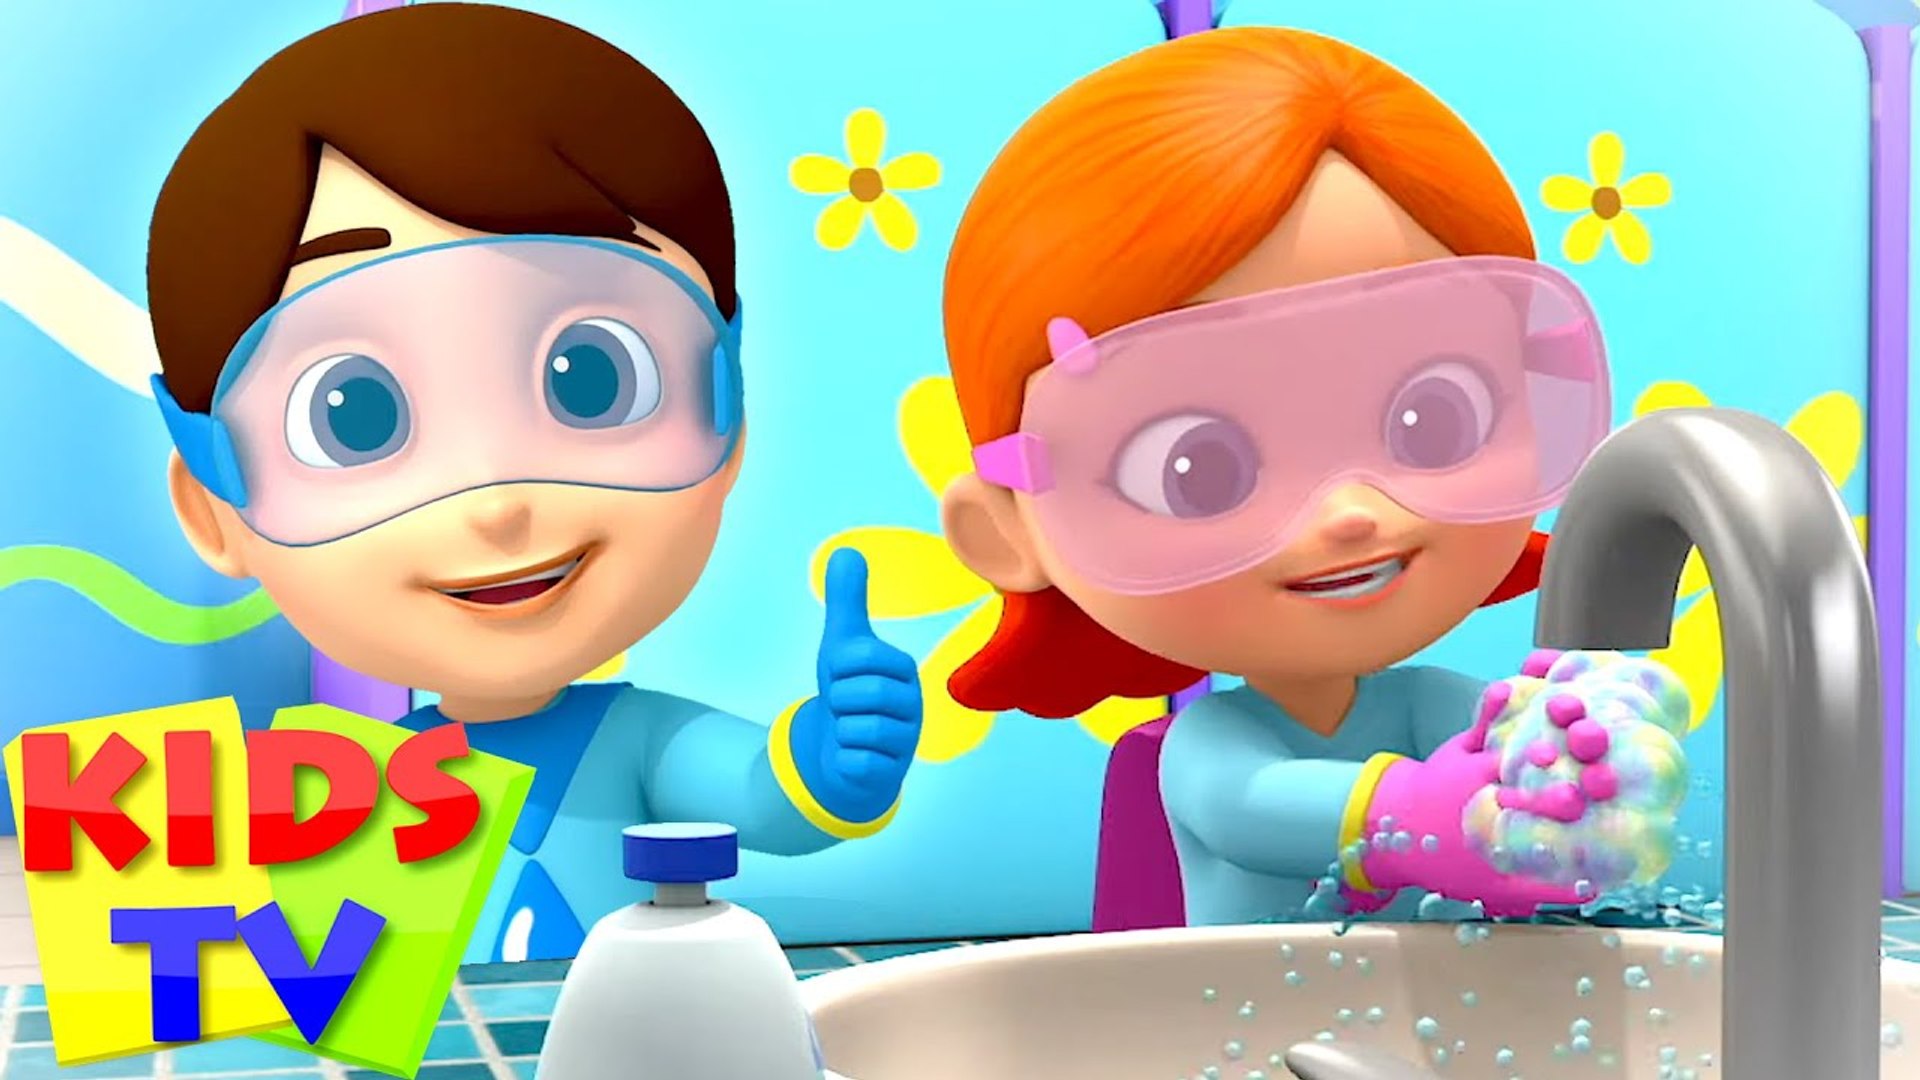 Wash Your Hands Song - Healthy Habits Song, Kids Songs & Nursery Rhymes